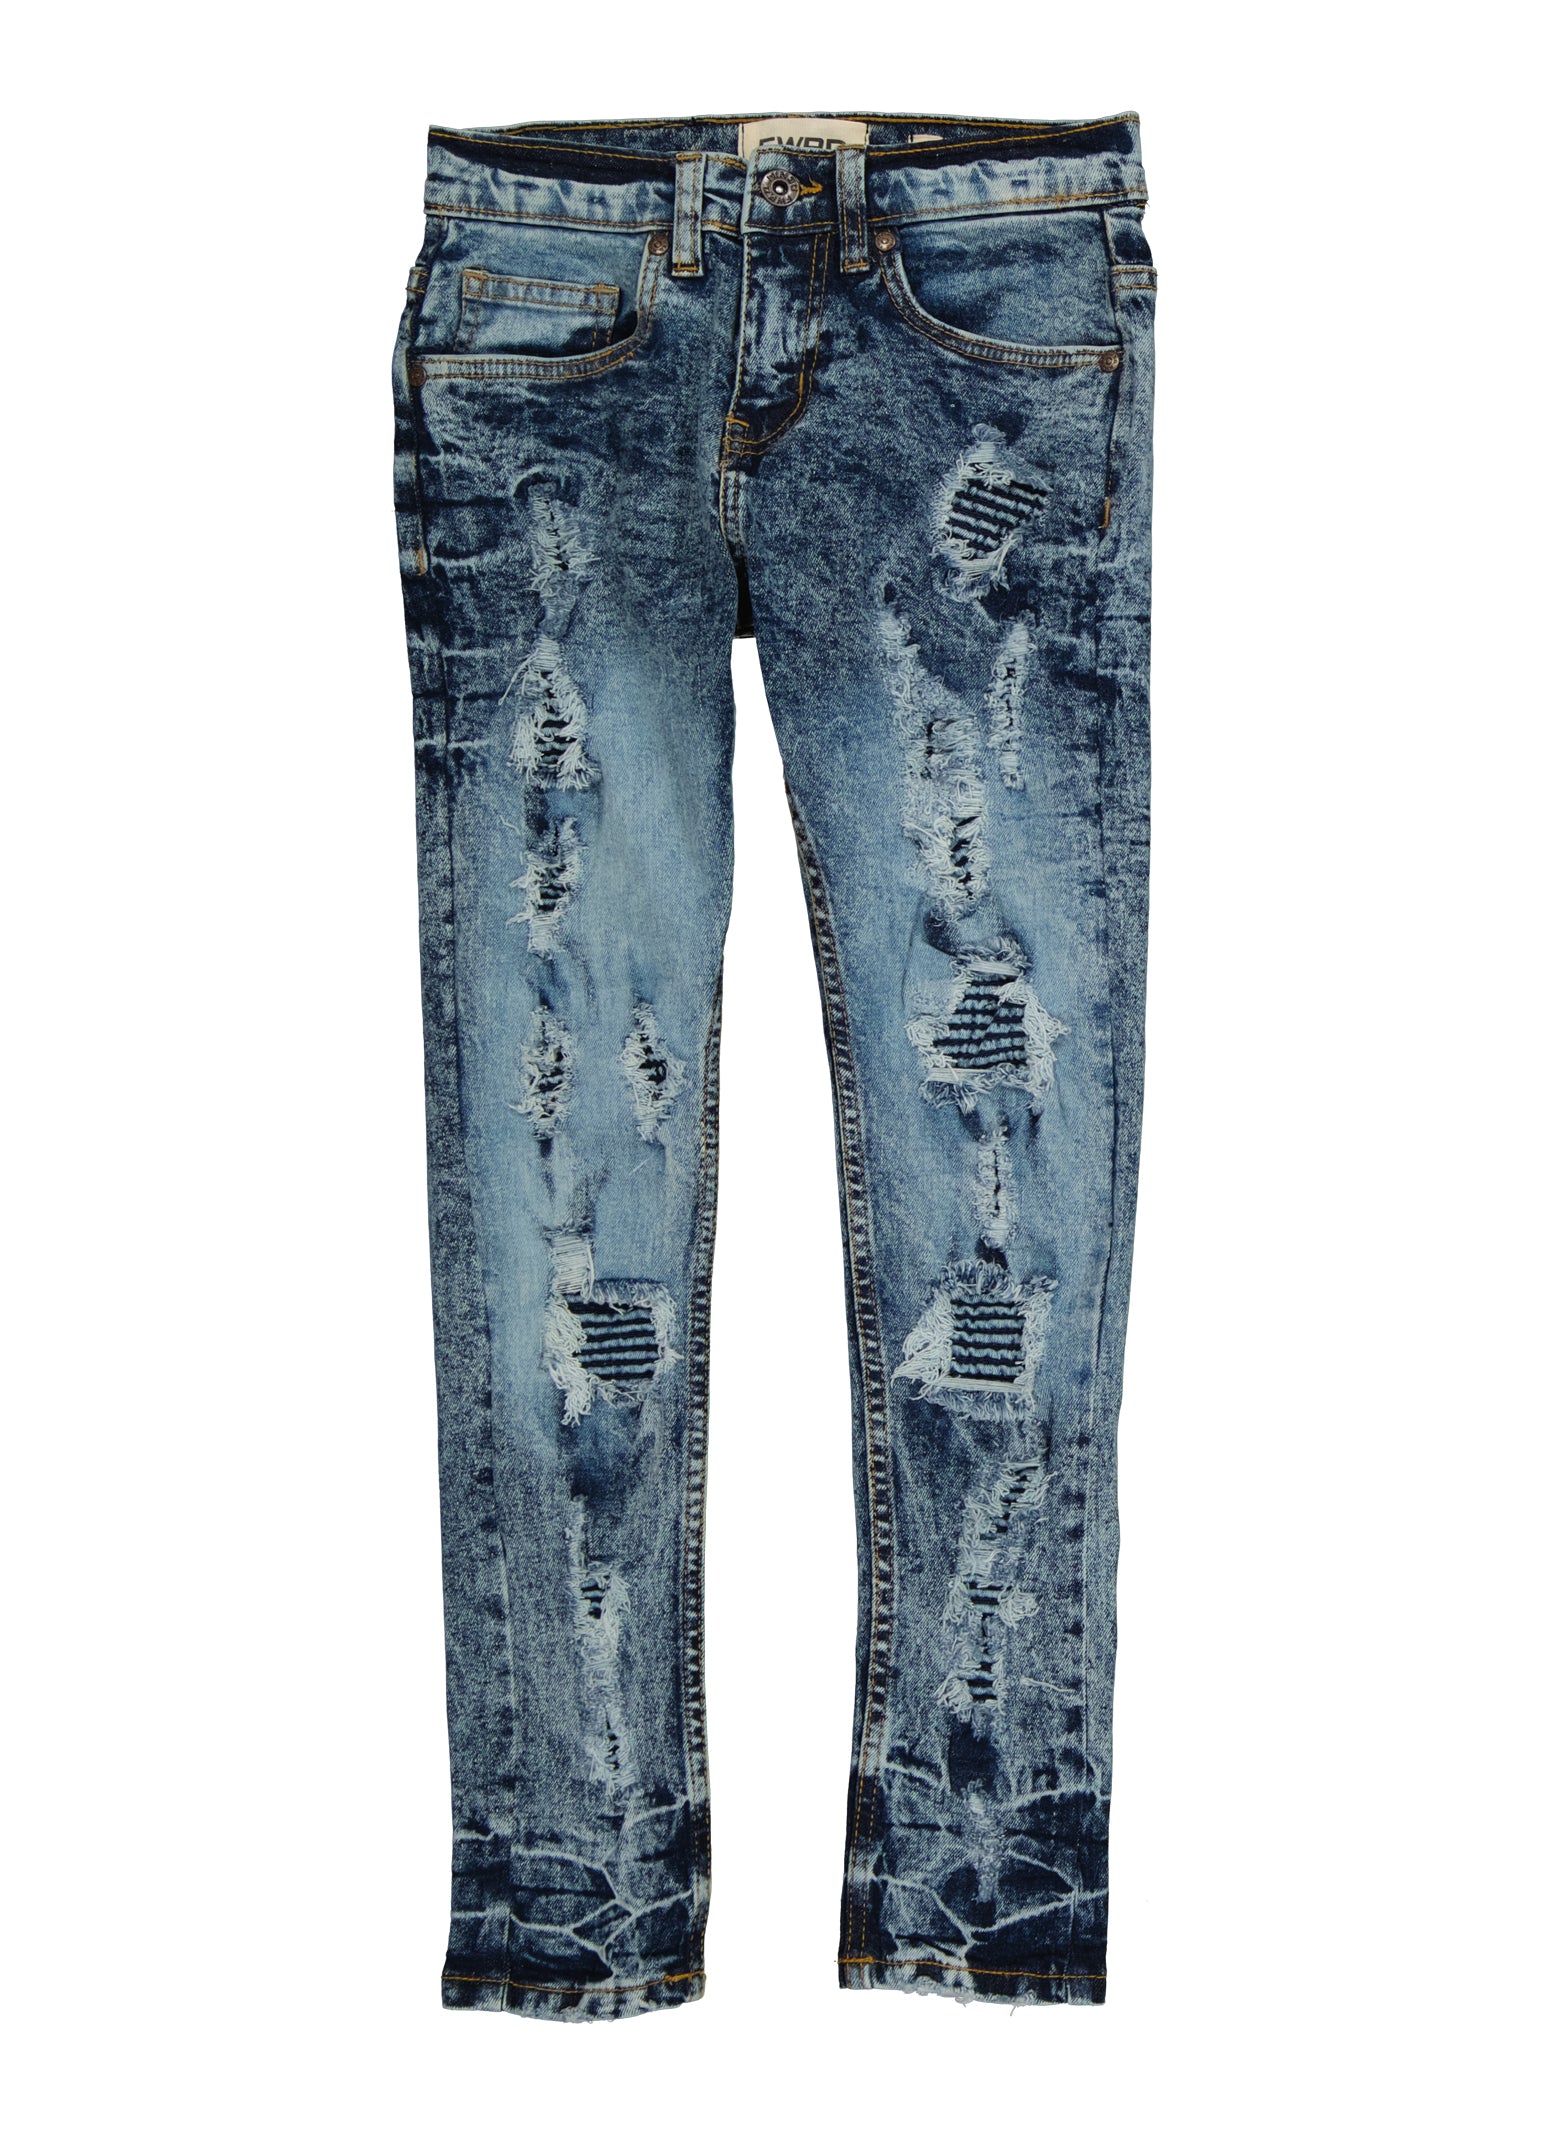 Boys Acid Wash Ripped and Repair Jeans, Blue, Size 14